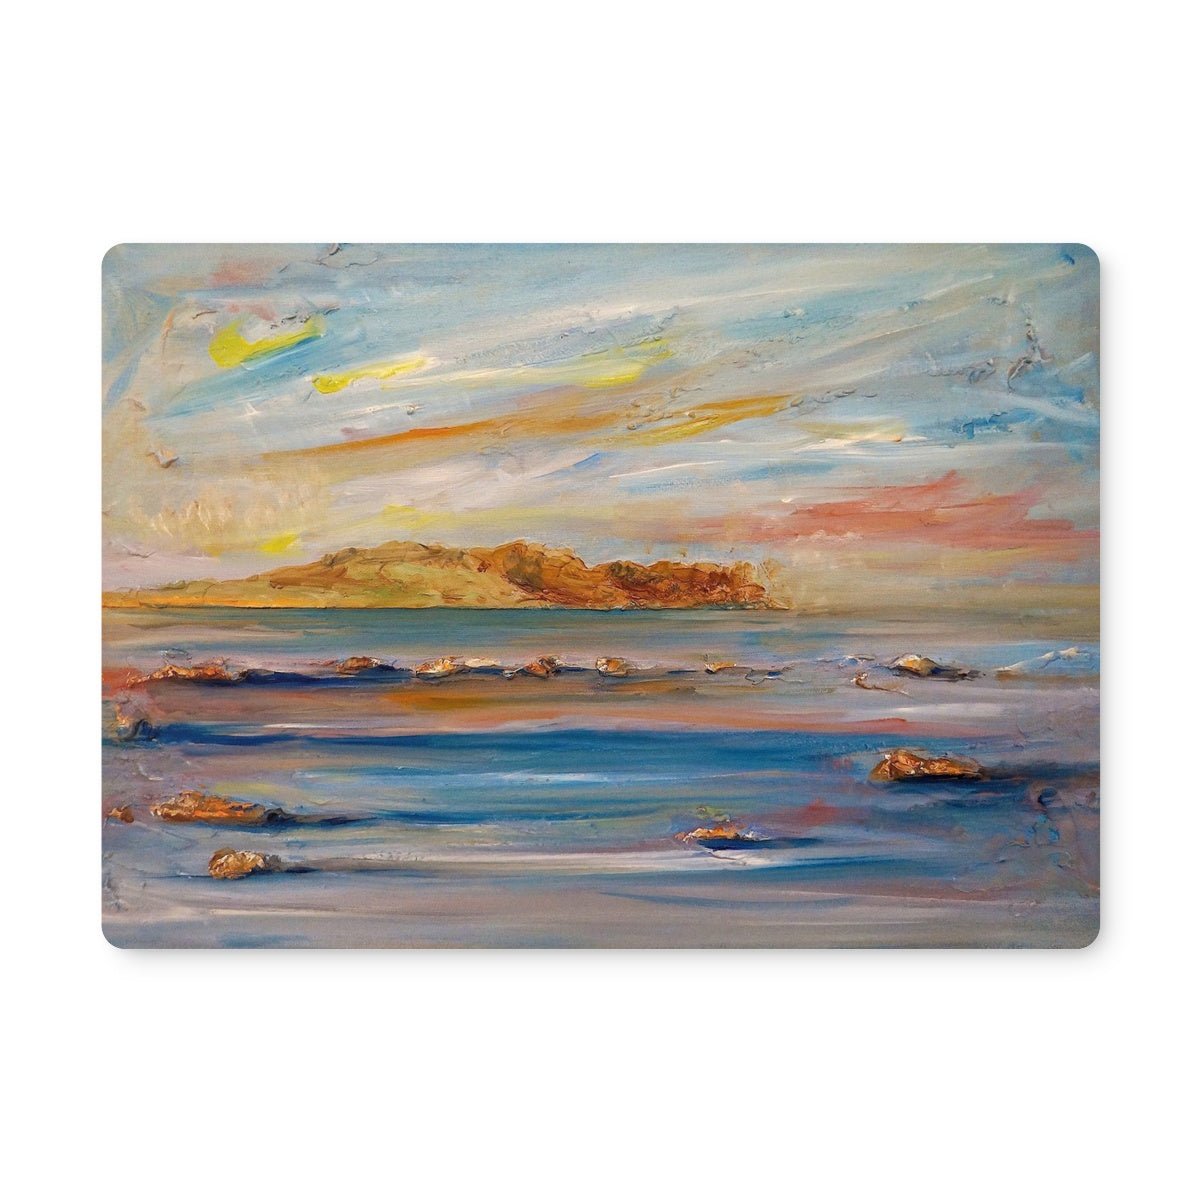 Tiree Dawn Art Gifts Placemat-Placemats-Hebridean Islands Art Gallery-Single Placemat-Paintings, Prints, Homeware, Art Gifts From Scotland By Scottish Artist Kevin Hunter